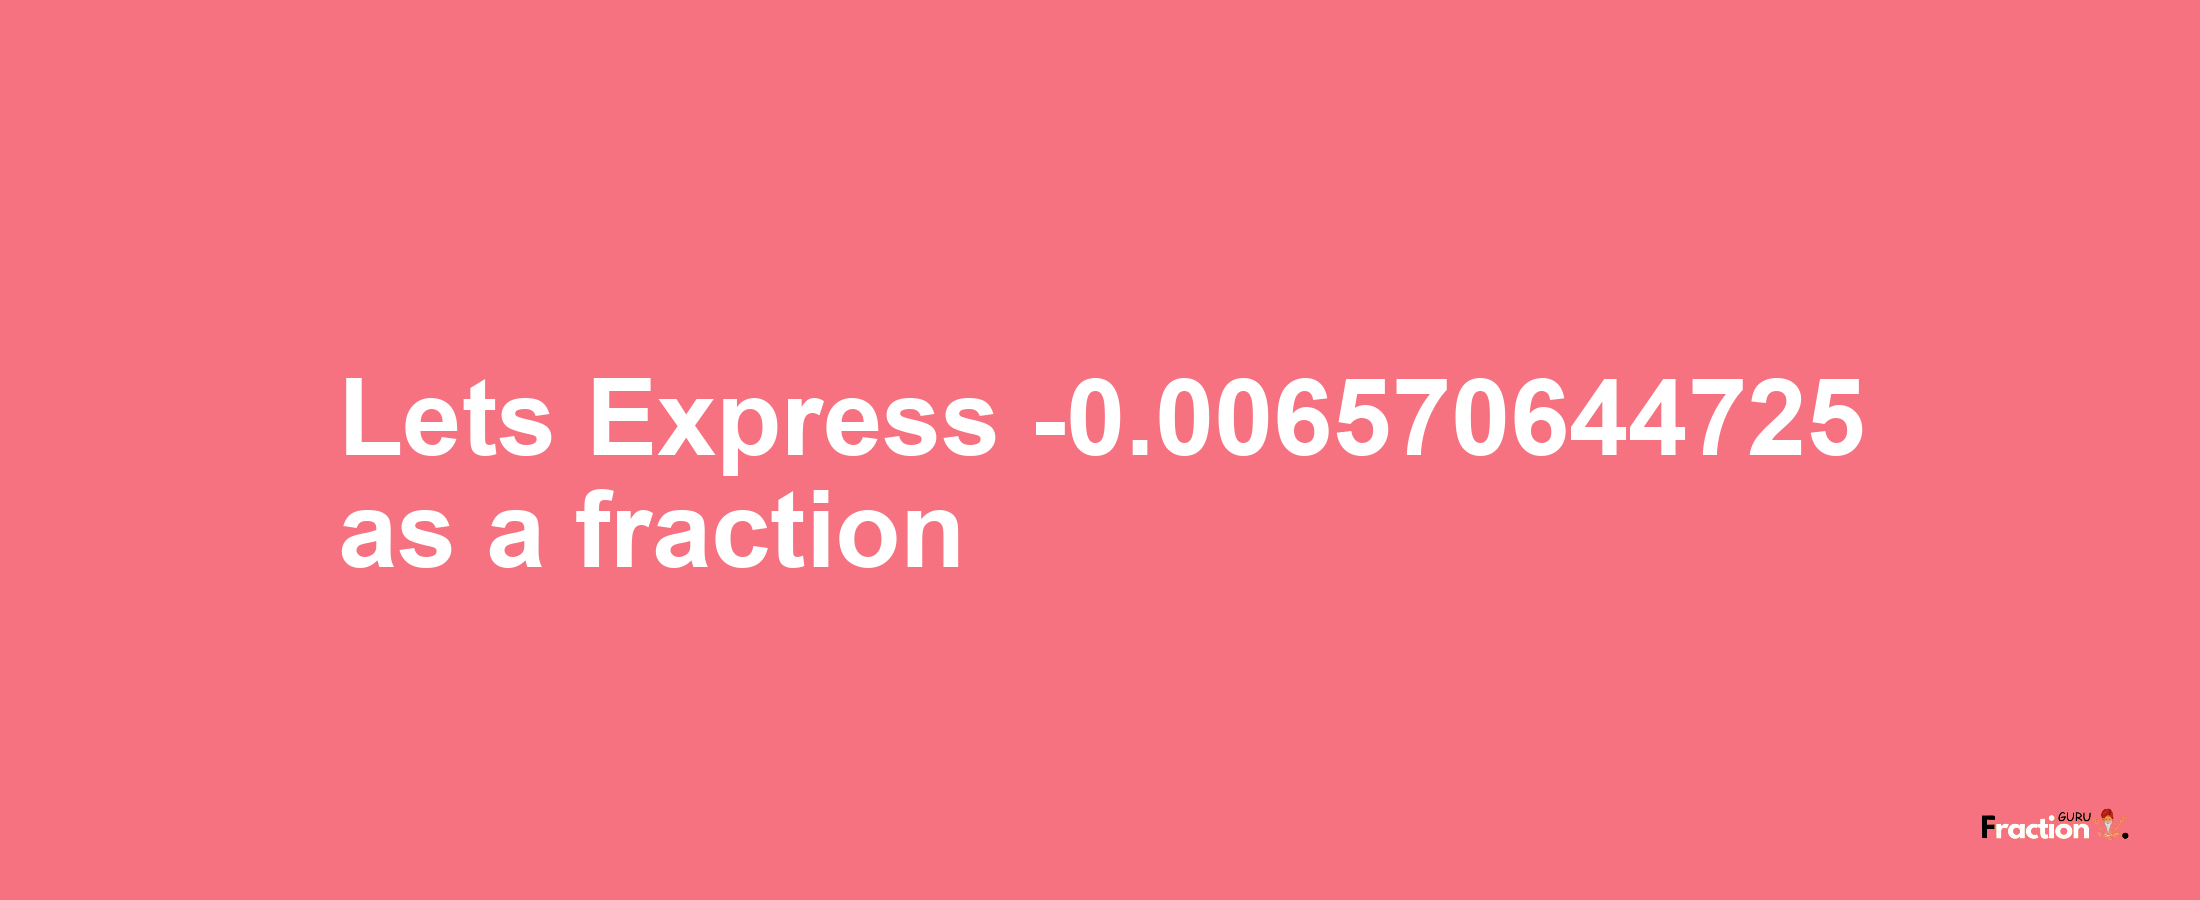 Lets Express -0.006570644725 as afraction